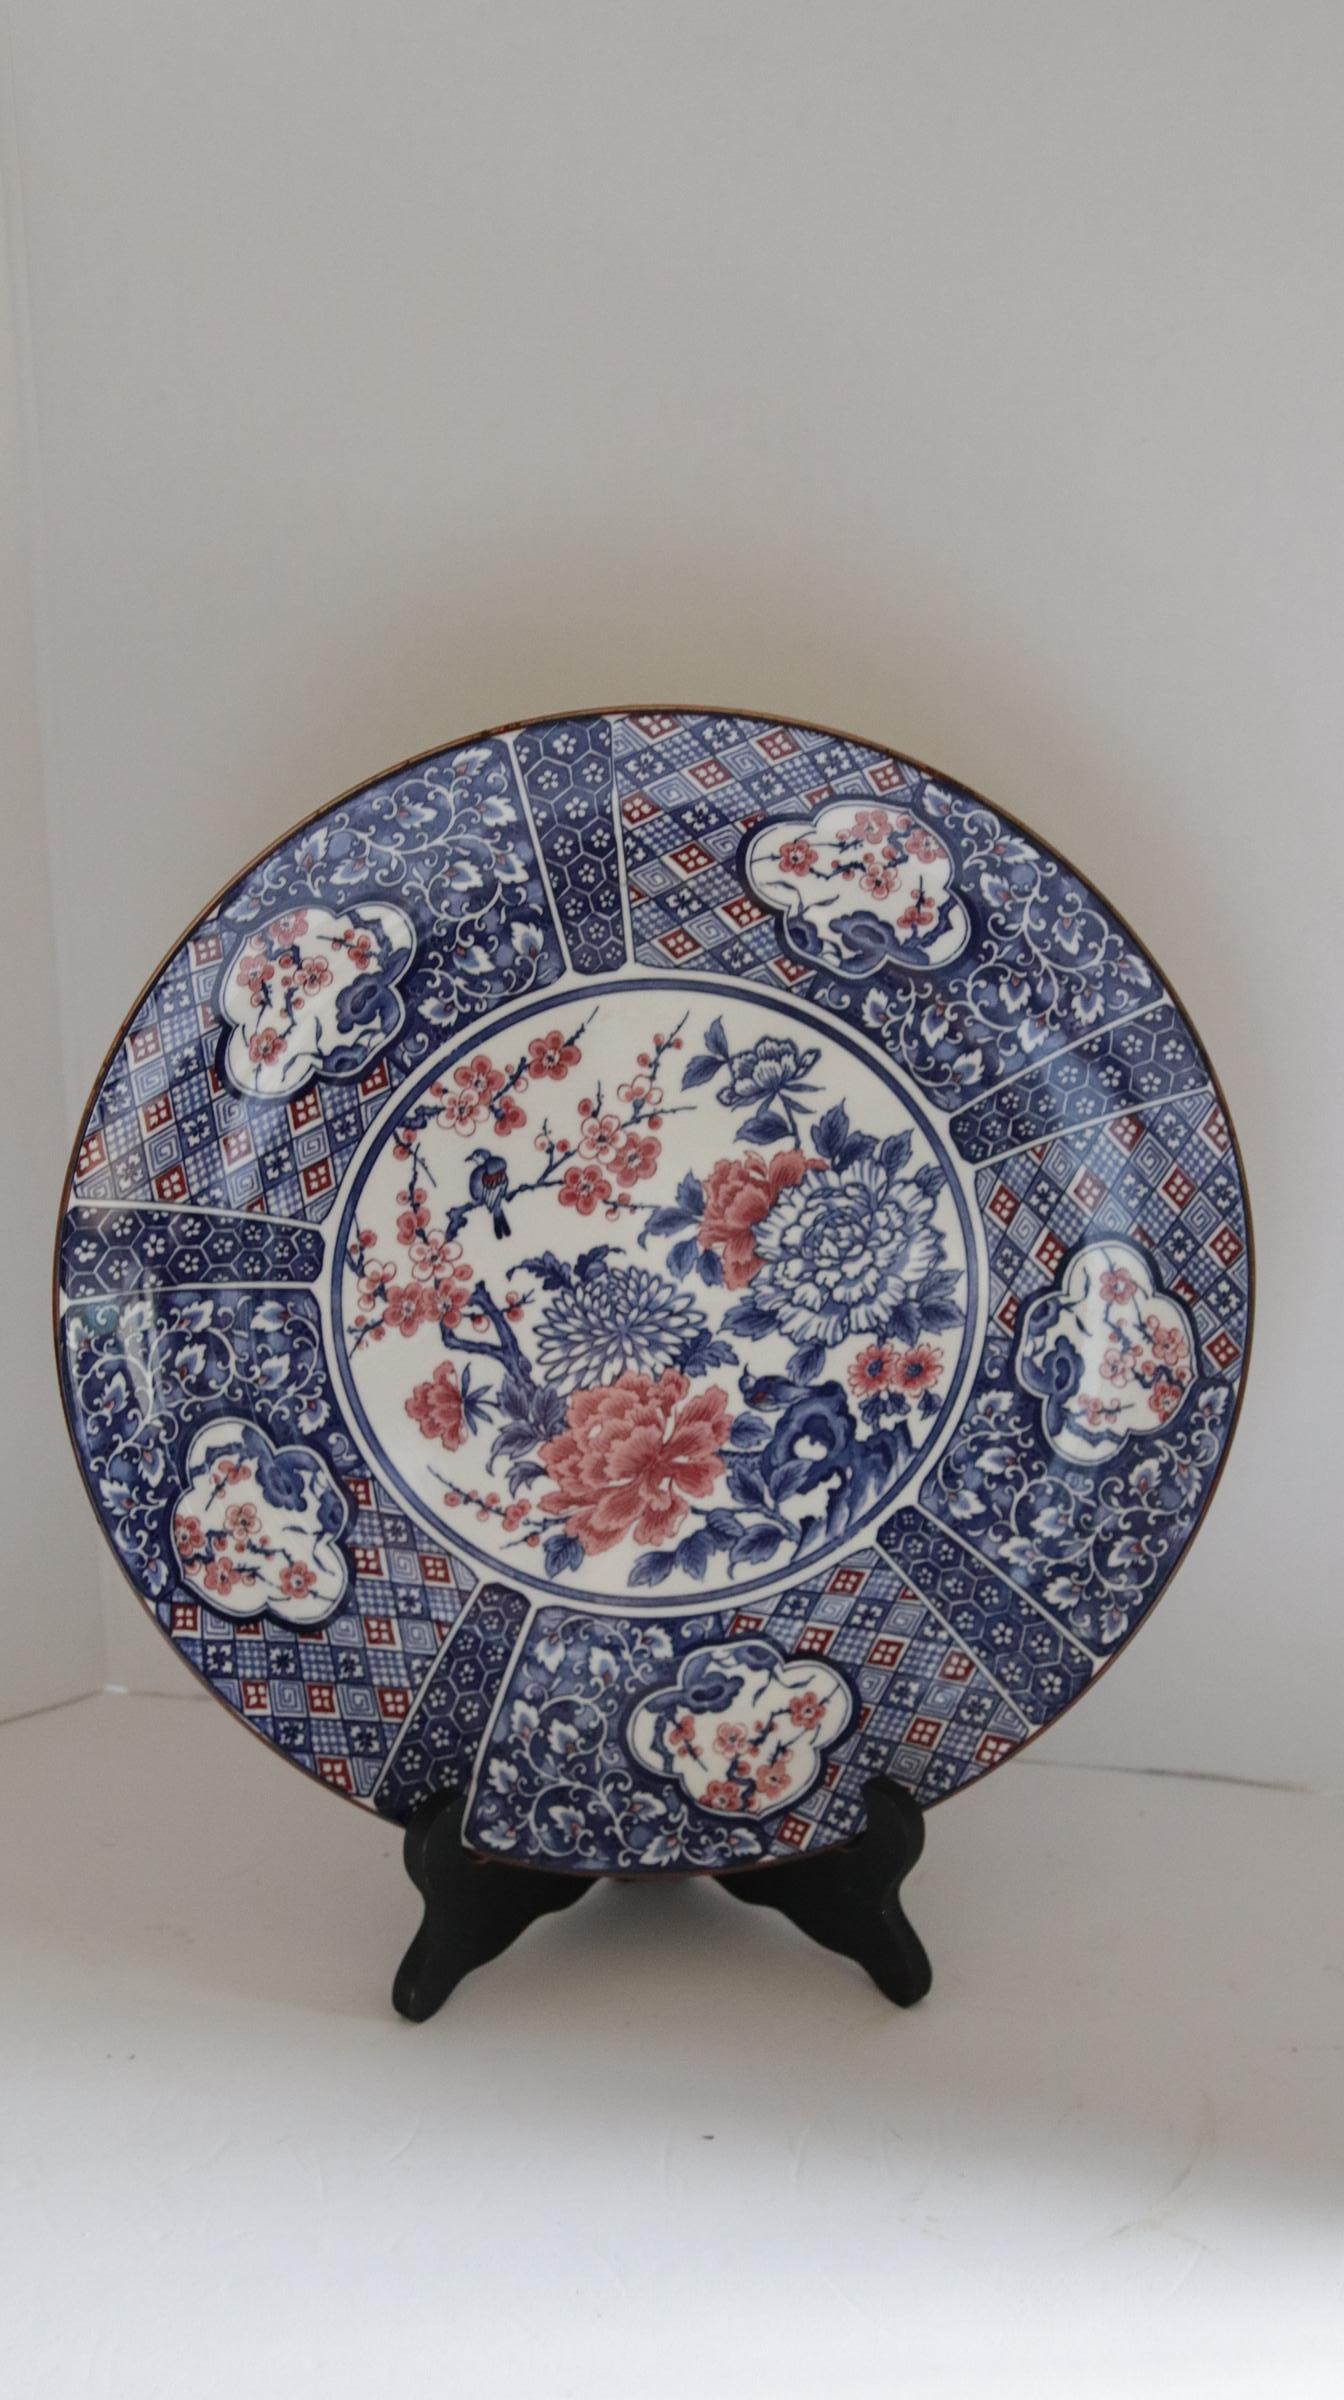 This is a beautiful Arita charger that has the most appealing color palette in salmon, blue and white. It is 13 inches wide and deep. It has a fluted rather than flat shape. The underglaze reflects lots of light that gives the charger a high-glaze